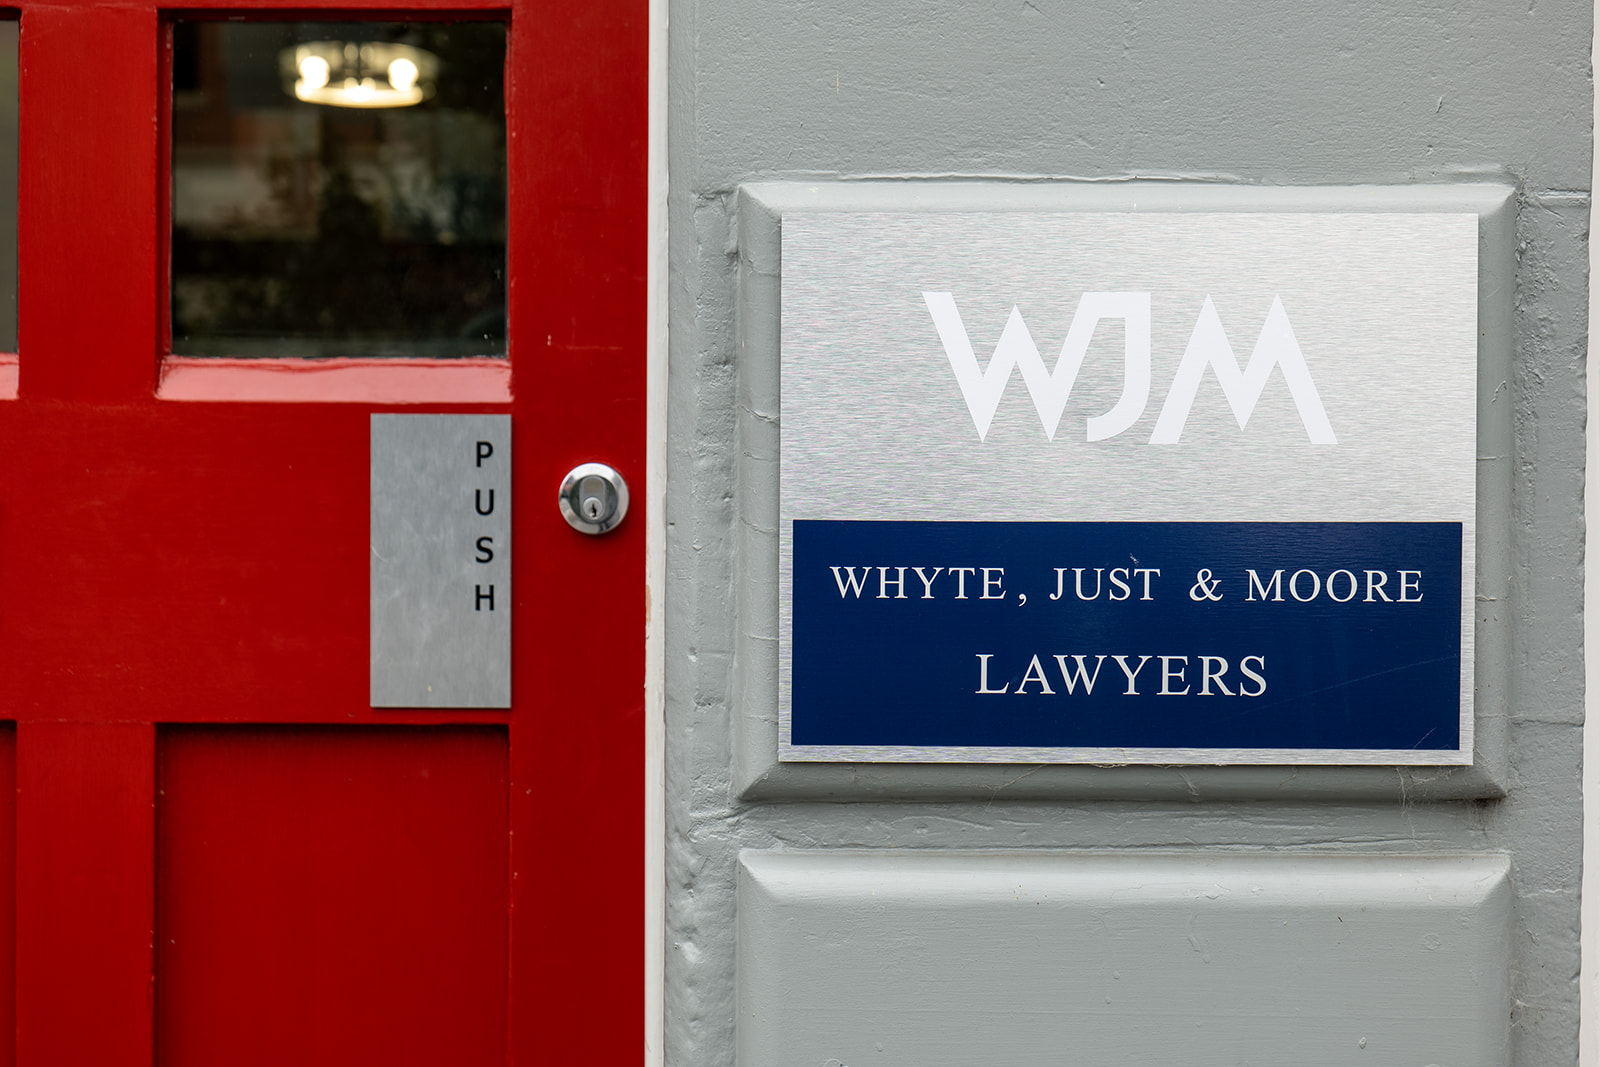 Property lawyer or conveyancer at Whyte, Just & Moore